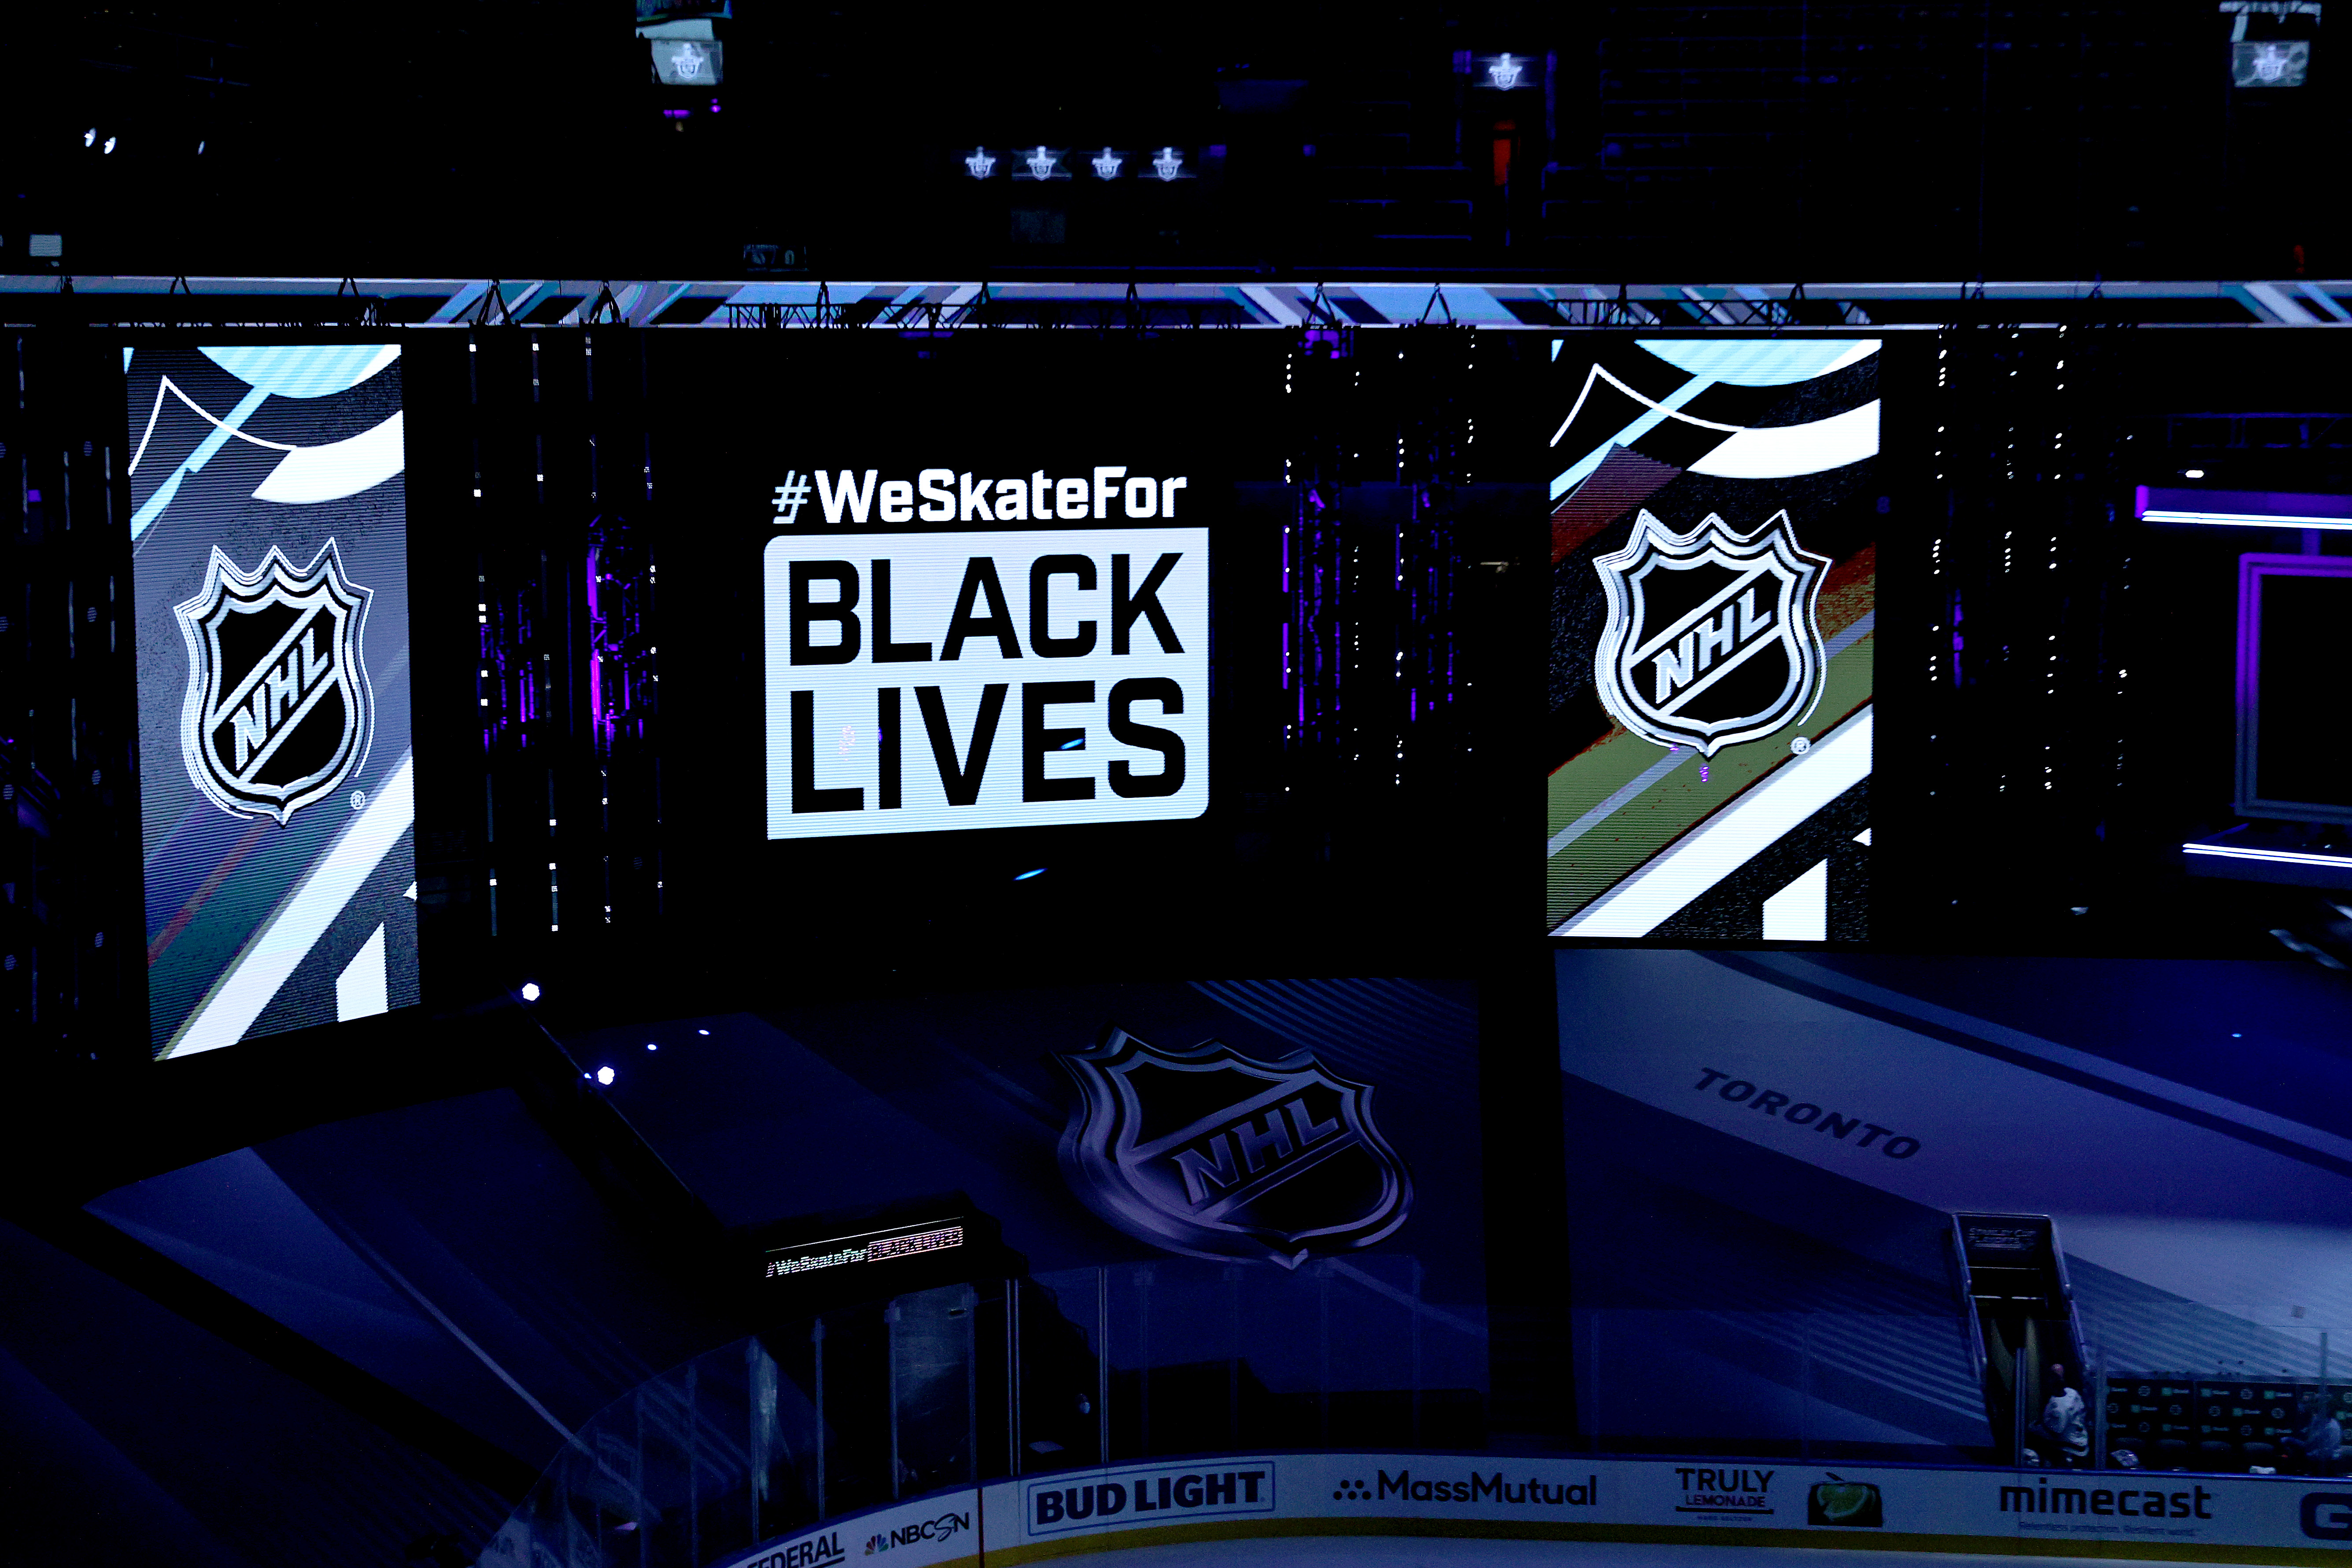 On Wednesday, the NHL had a chance to take a stand against systemic racism.  Instead, it stood down - The Boston Globe